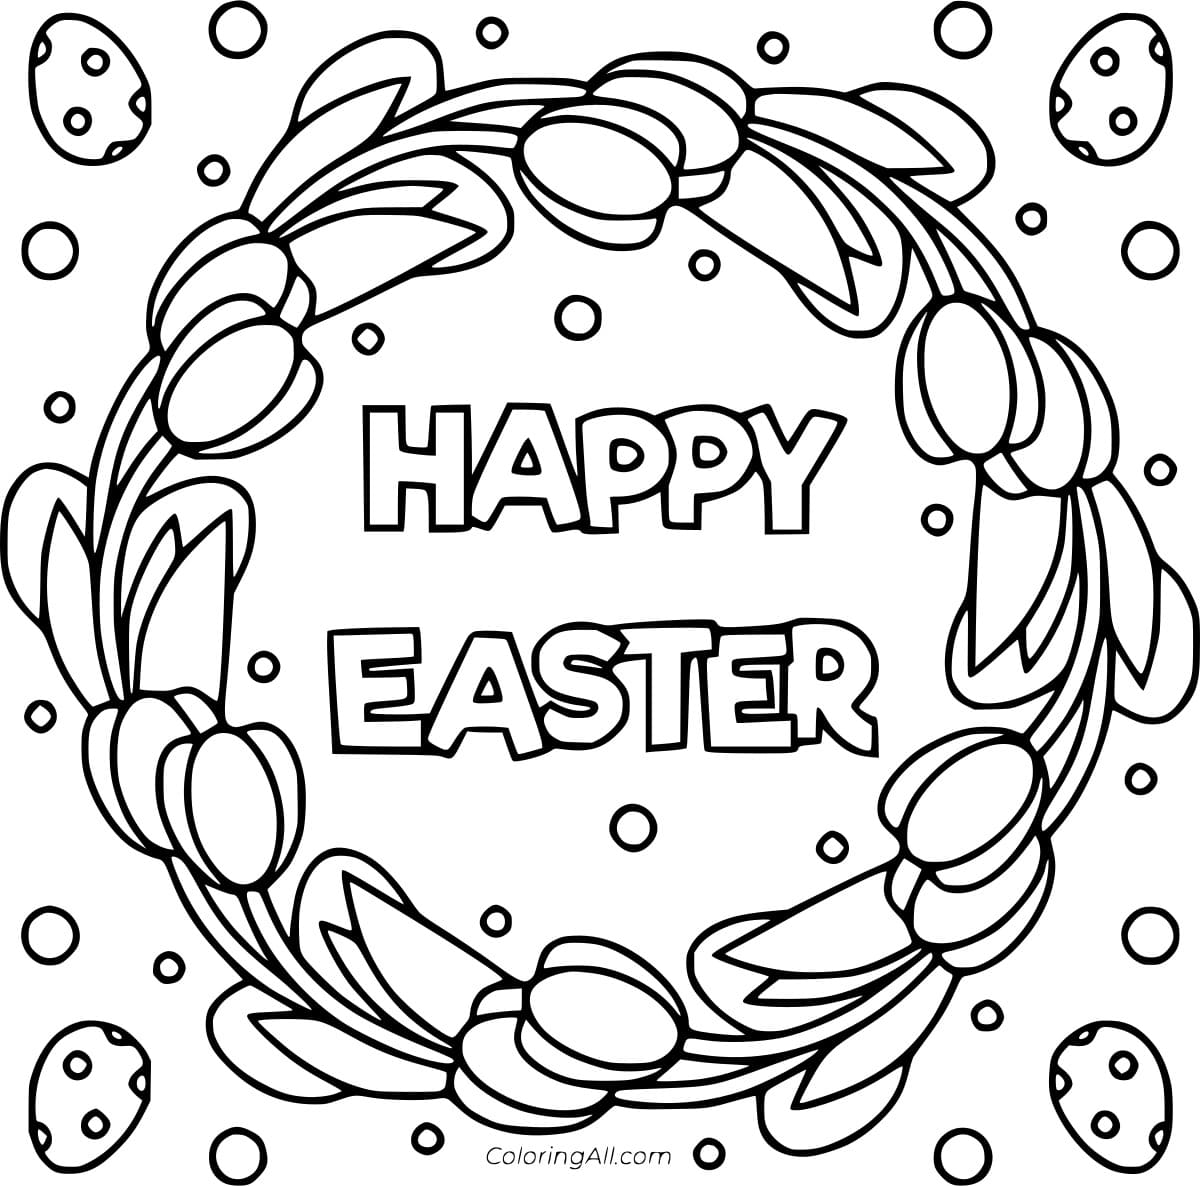 Happy Easter In The Wreath For Children